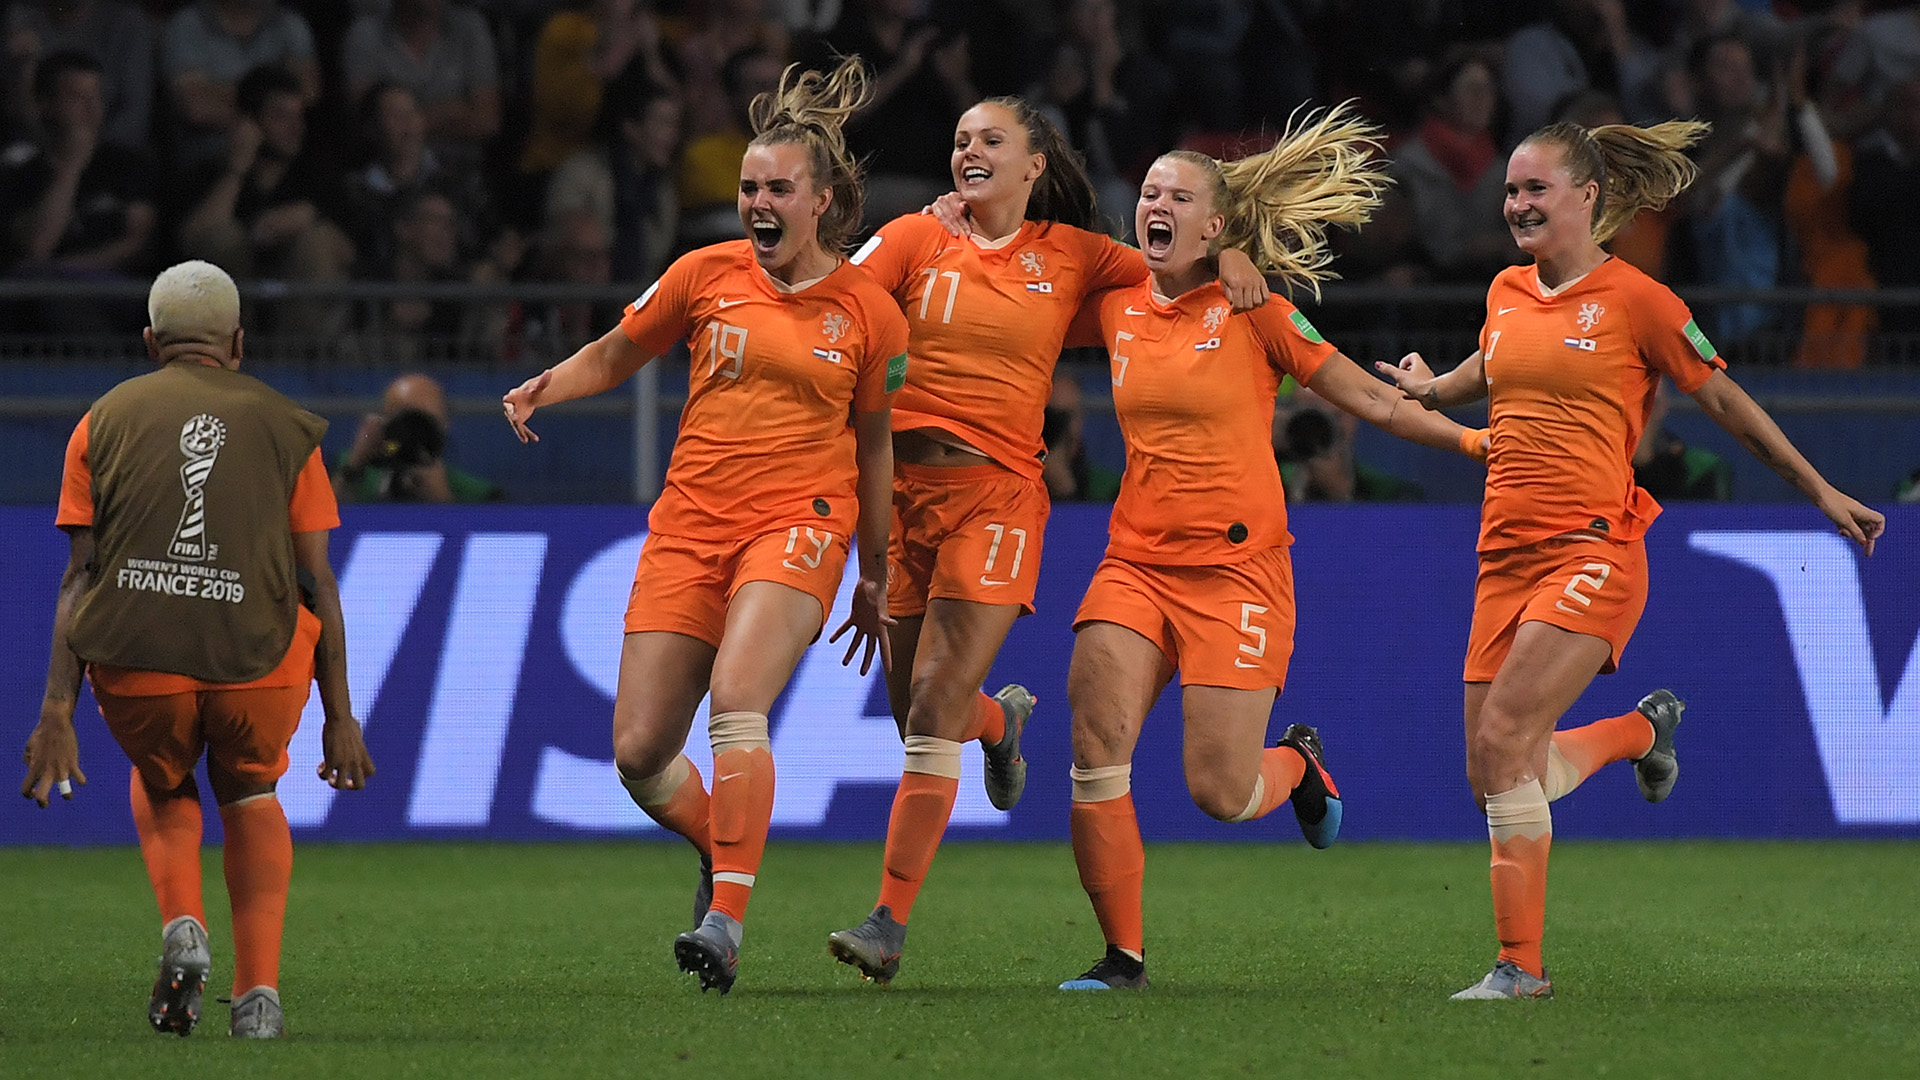 Holland wants to make history by winning its first World